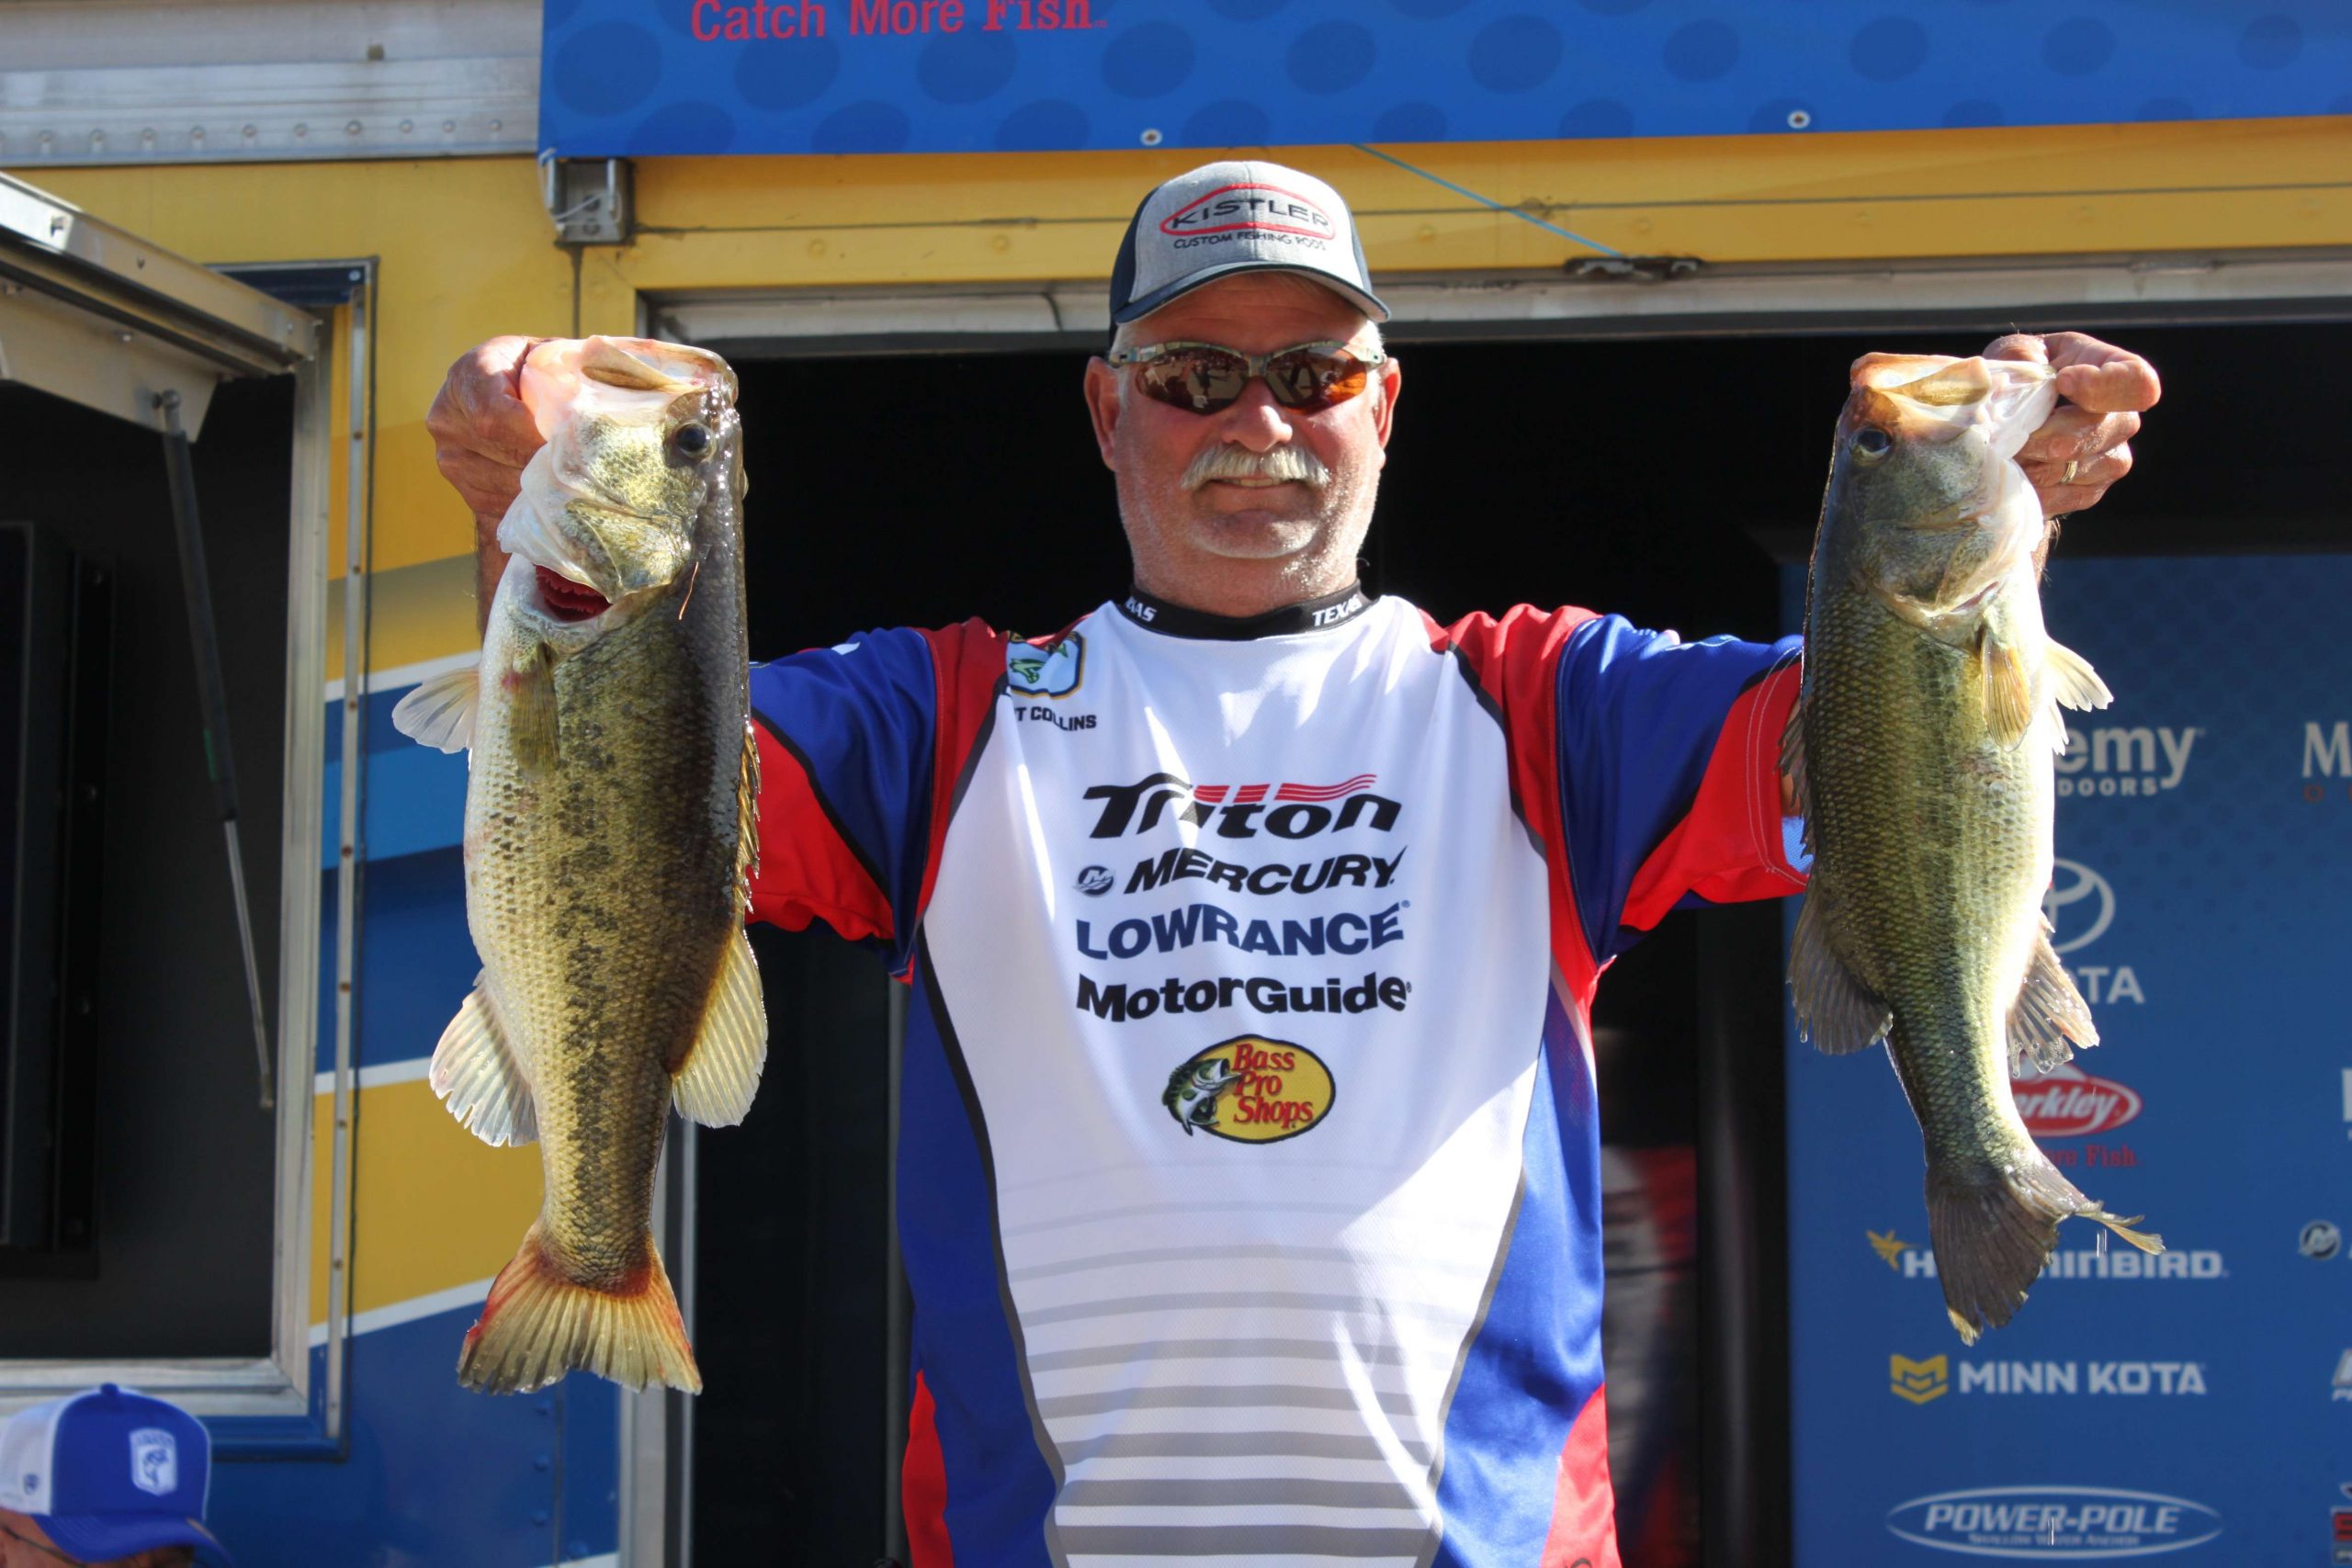 Albert Collins of Texas is fifth in the boater division with a two-day haul of 34-11.
